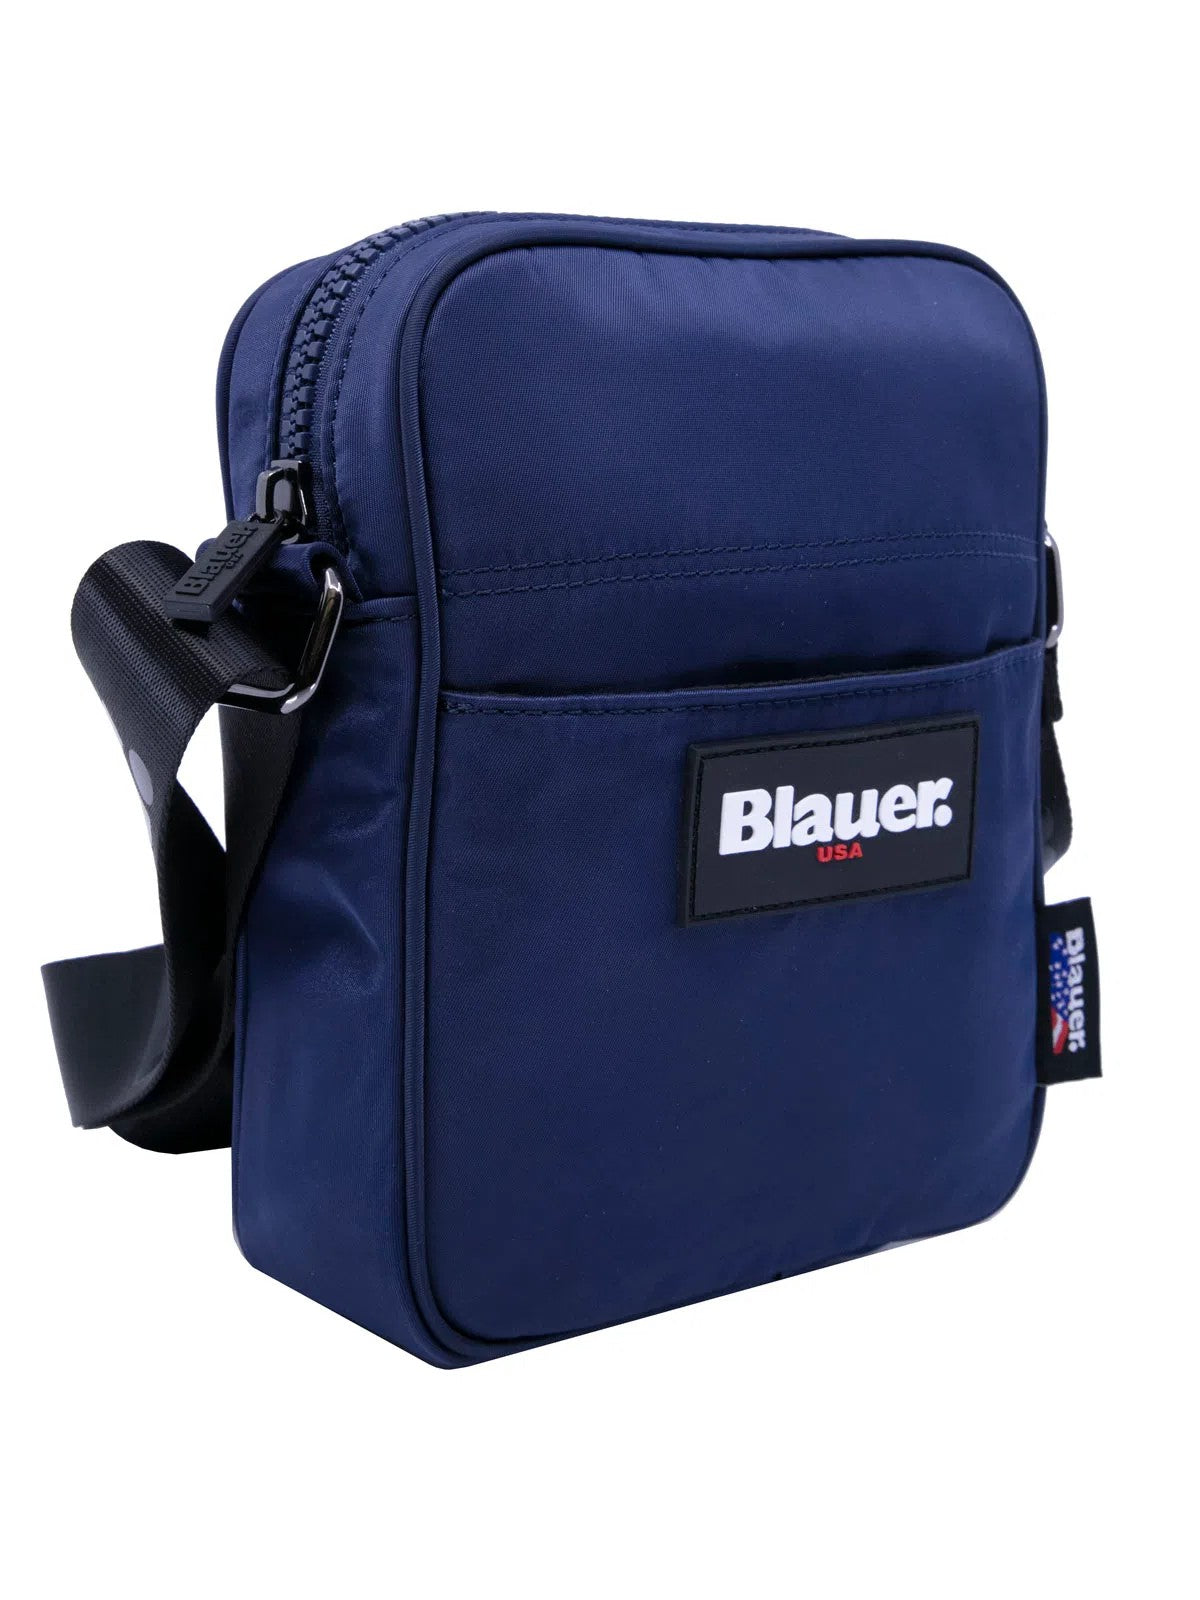 BLAUER Tracolla Uomo  S3FORT03/EAS NVY Blu